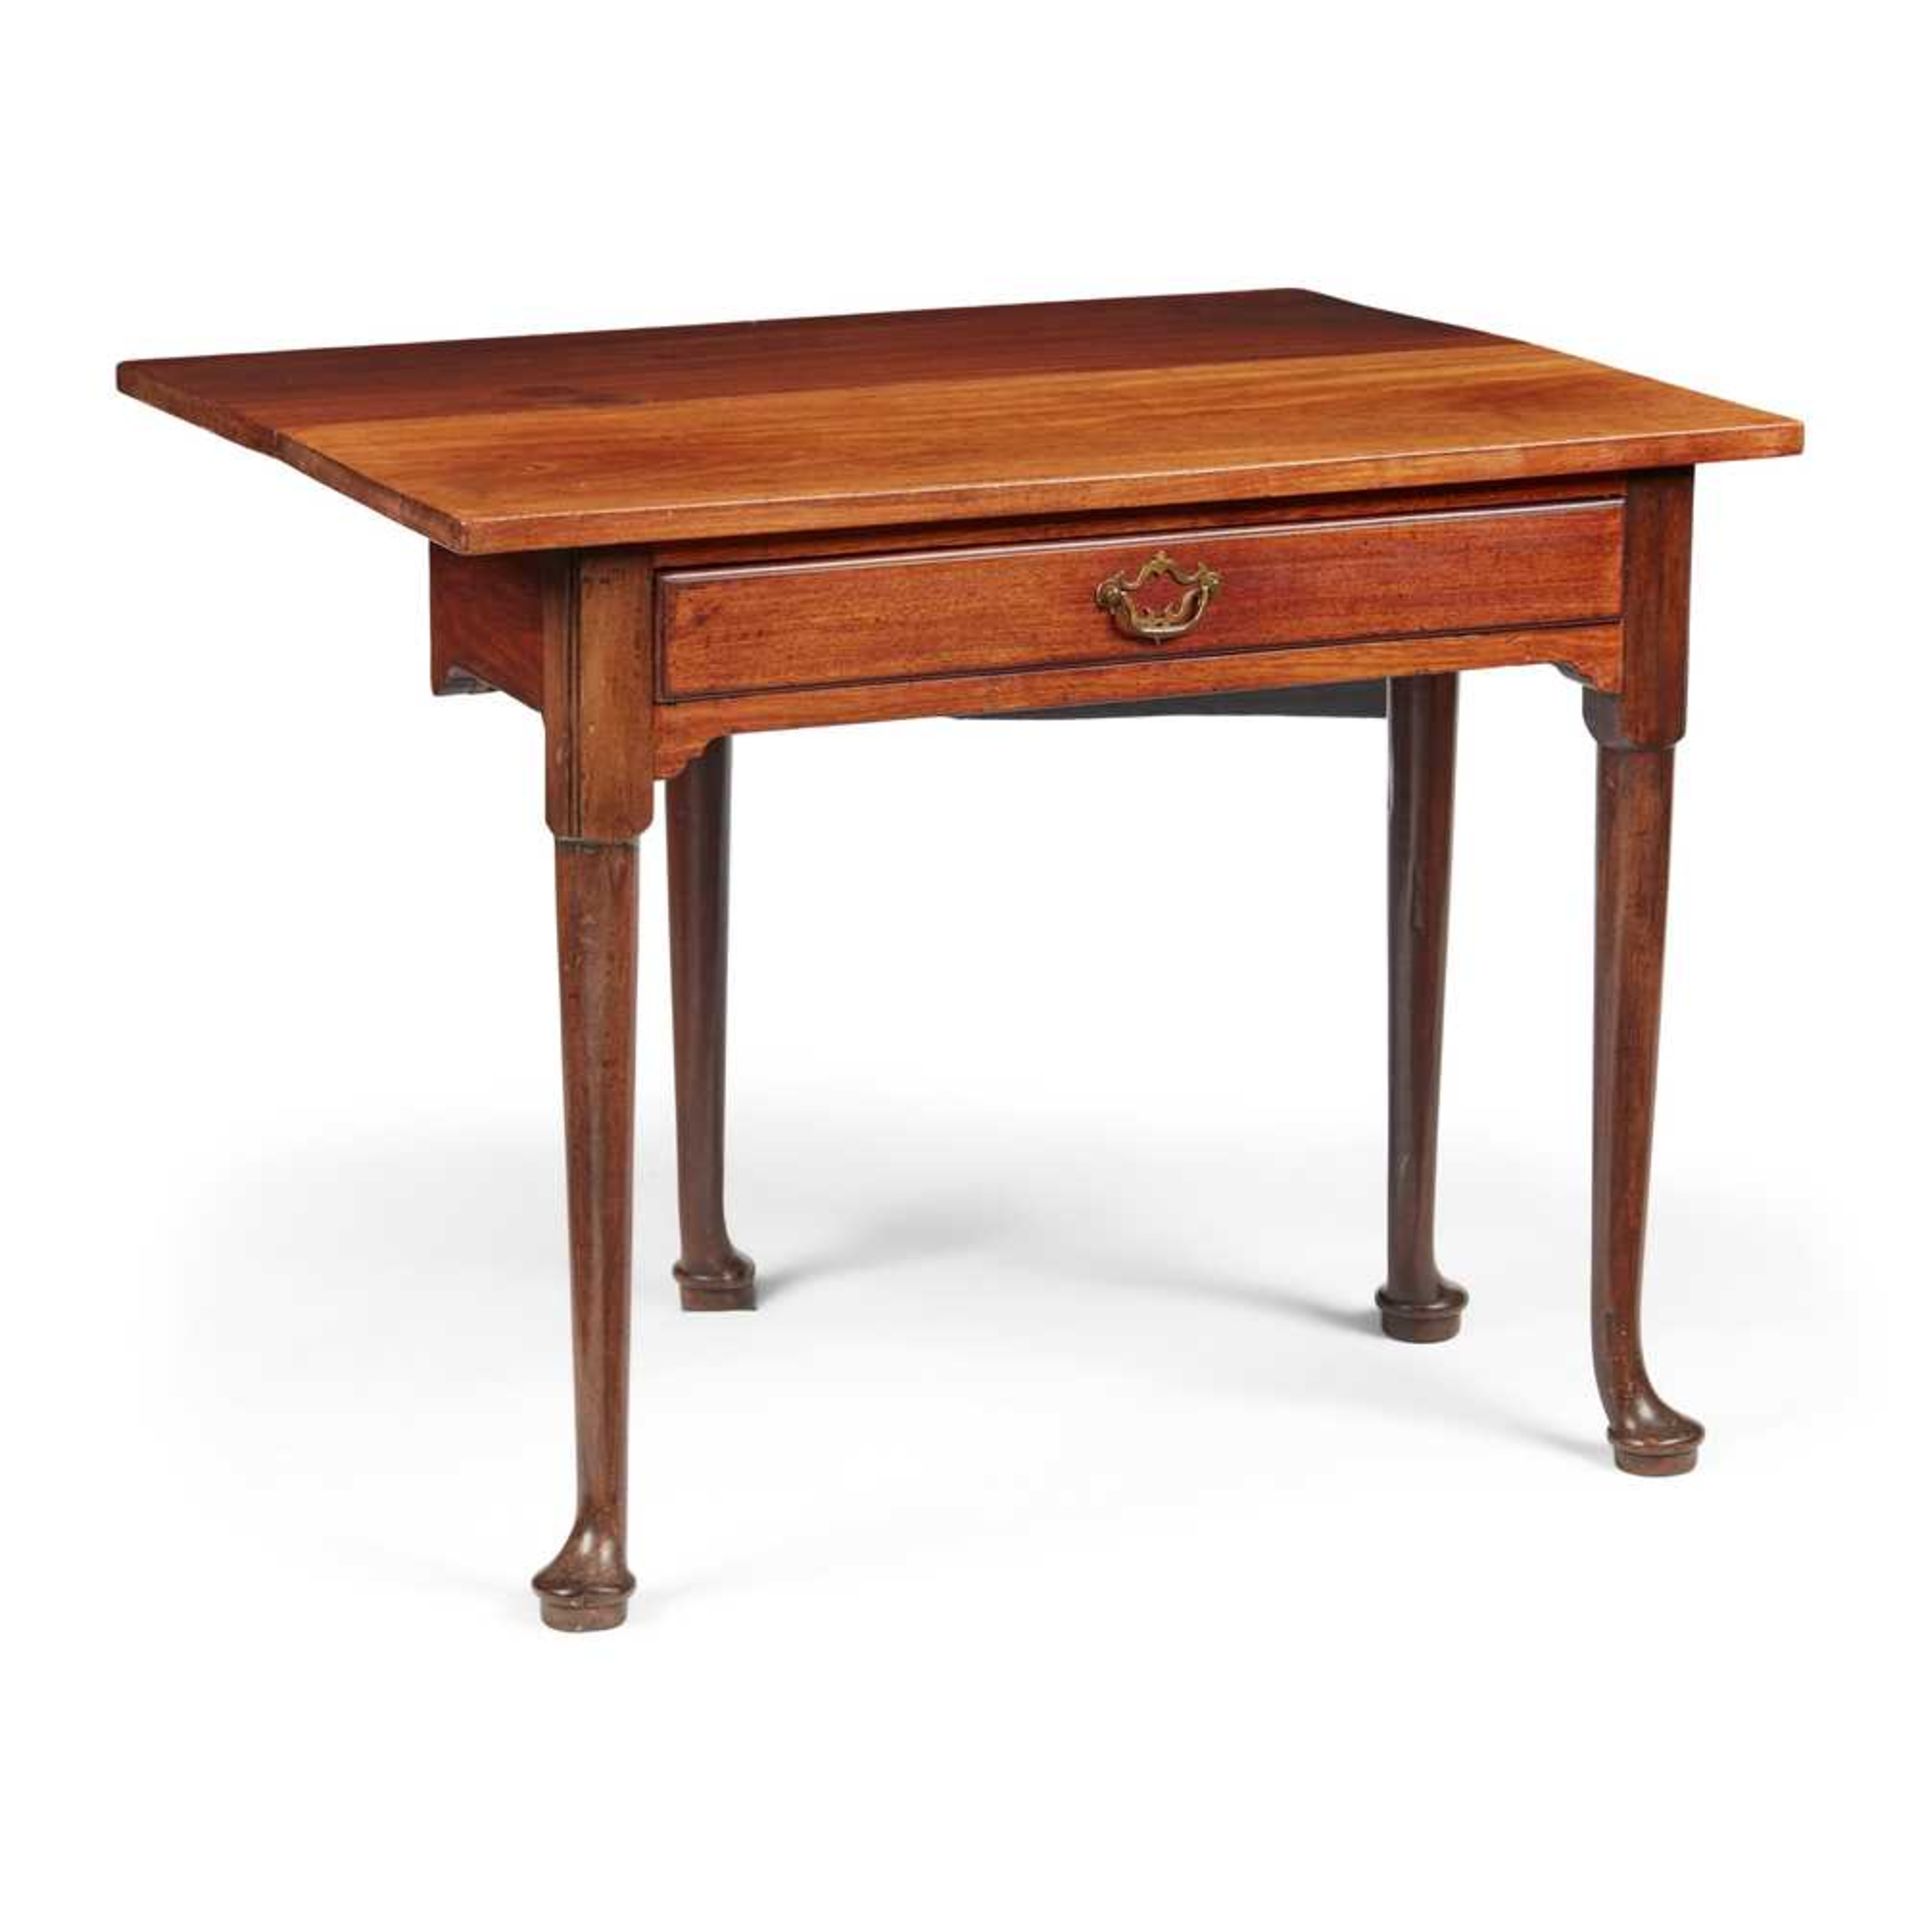 A GEORGE II MAHOGANY DROP-LEAF BEDROOM TABLE, IN THE MANNER OF ALEXANDER PETER MID 18TH CENTURY - Image 2 of 2